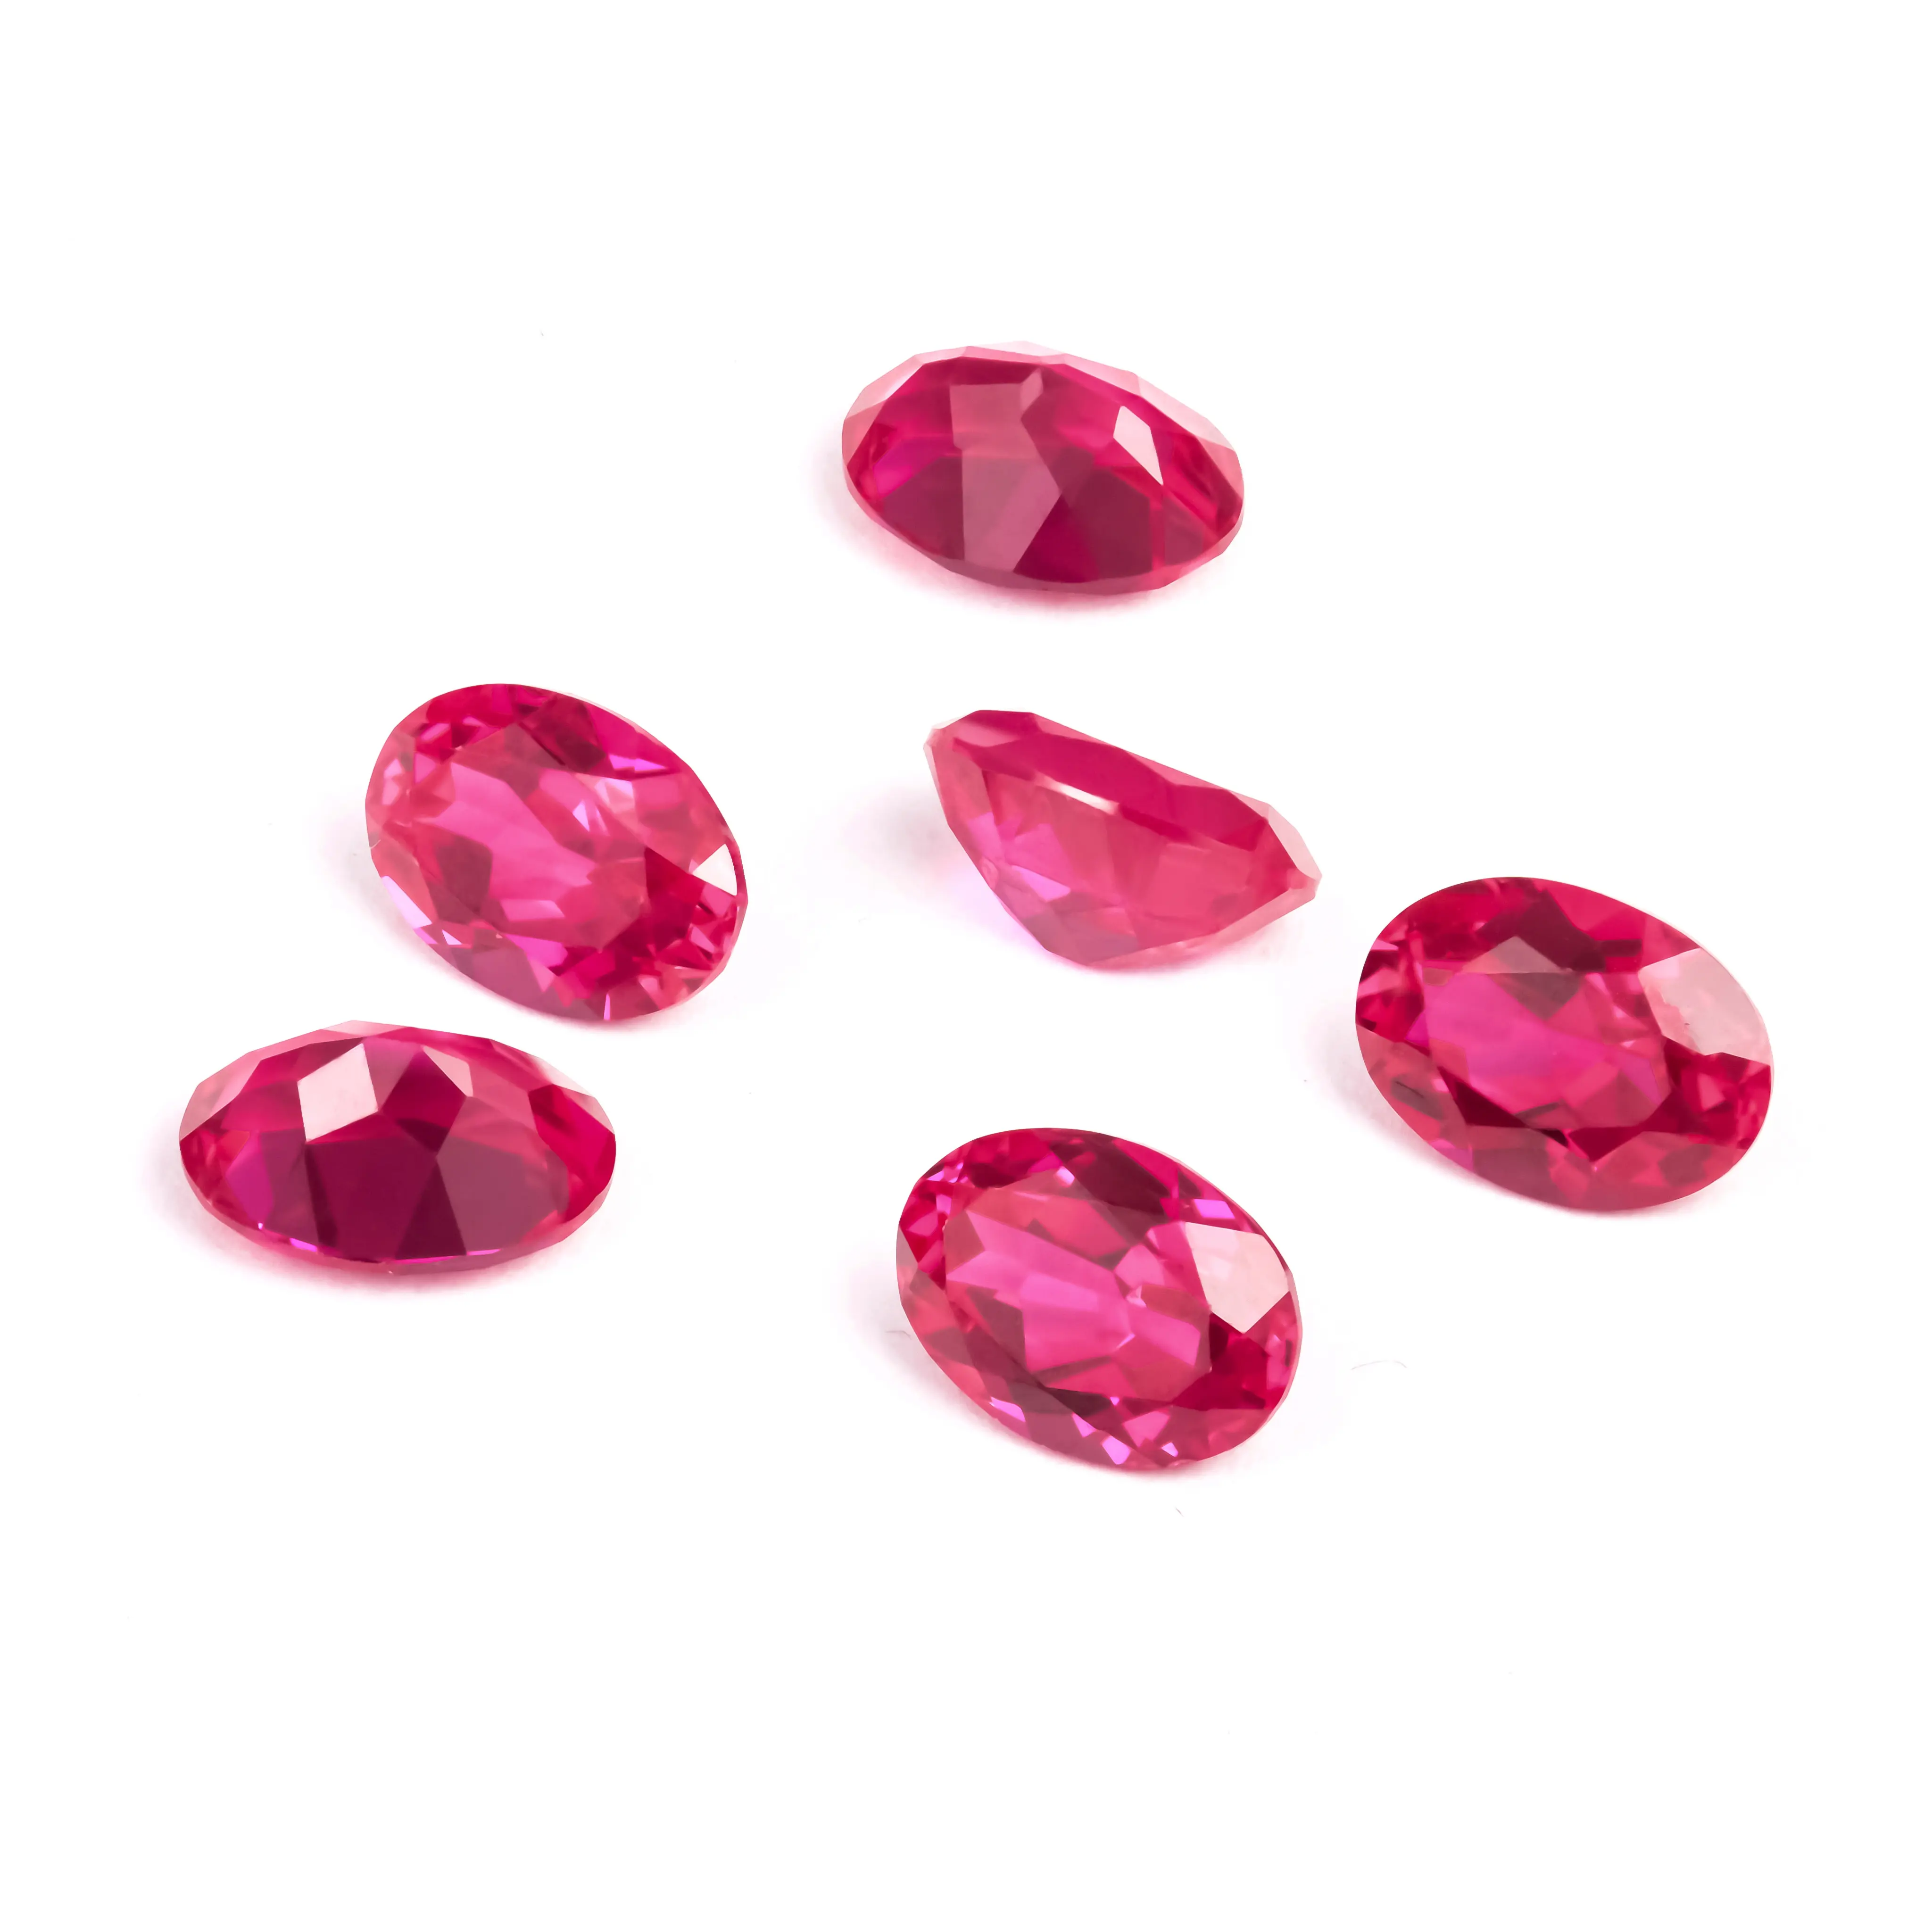 Wholesale own natural red color VVS hight quality Oval cut Ruby rare merchants have unique lab grown Gemstone